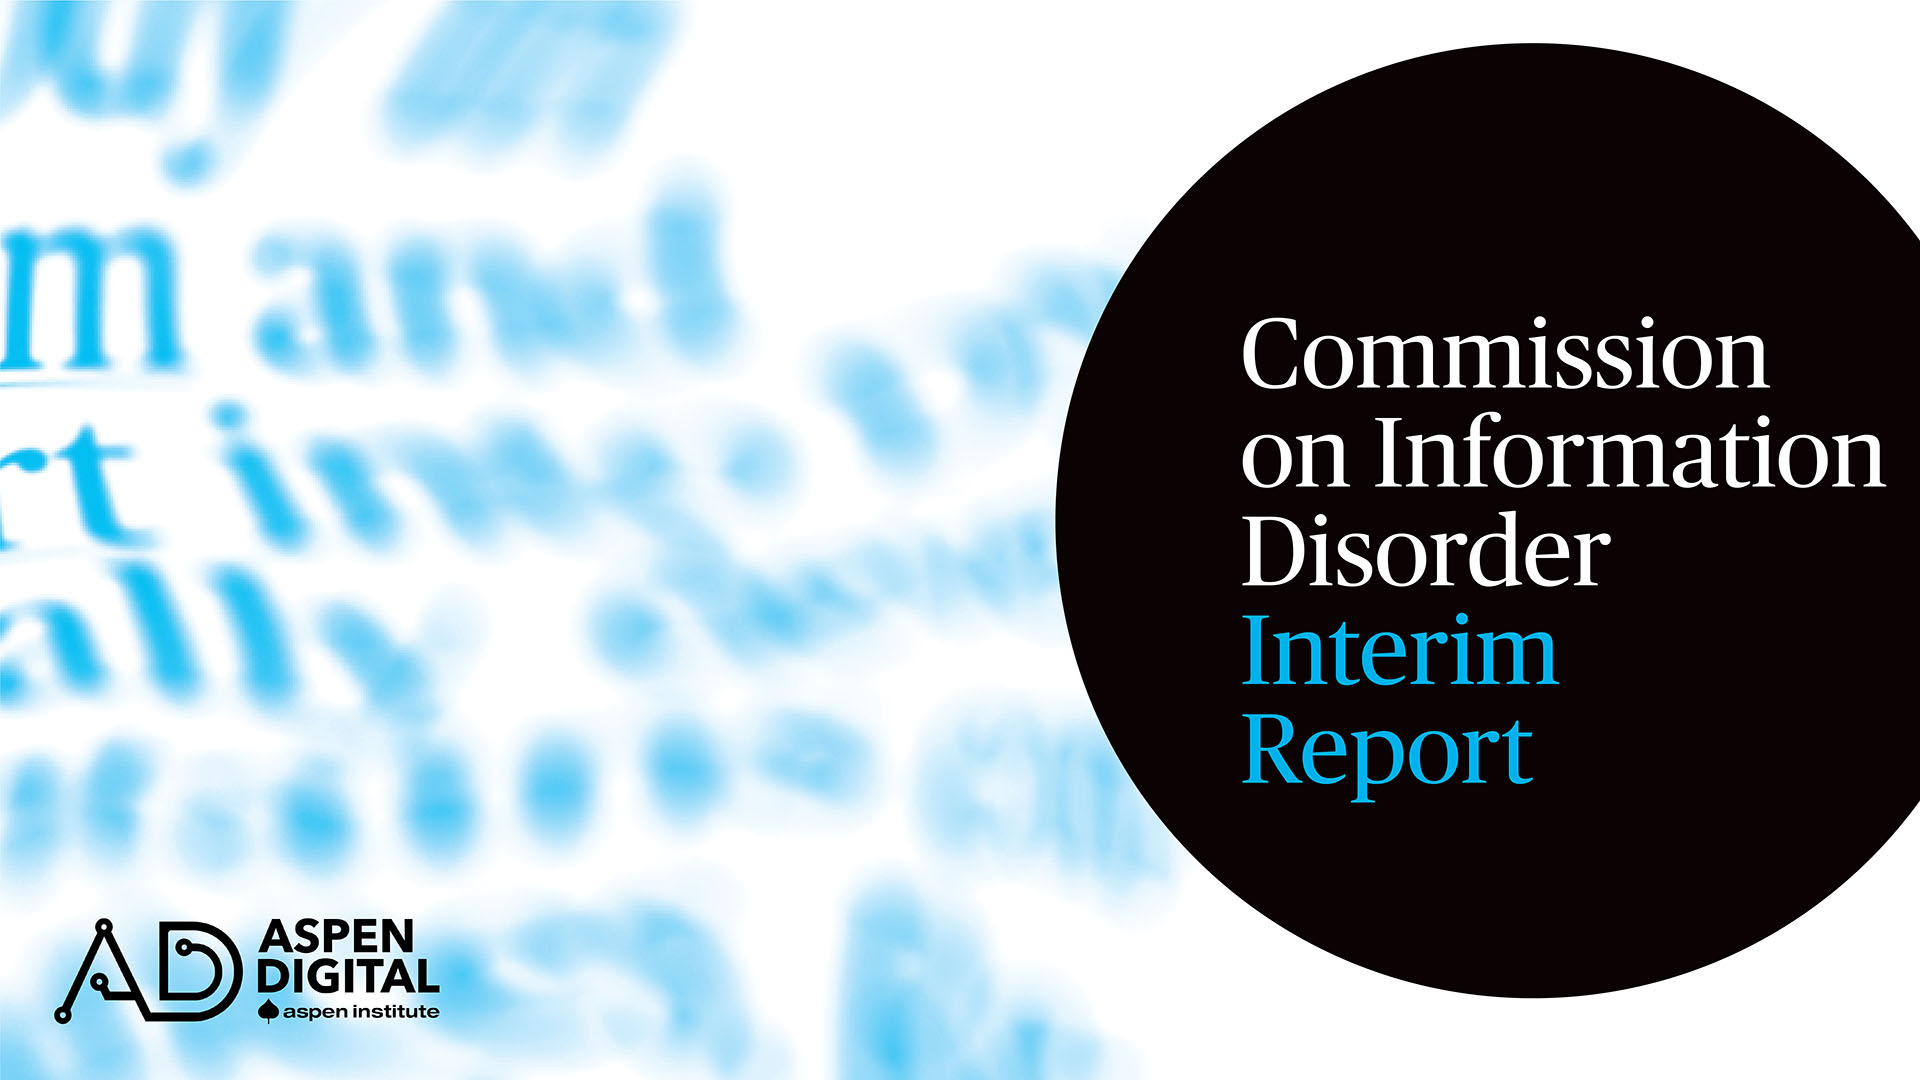 Commission on Information Disorder Interim Report Launch